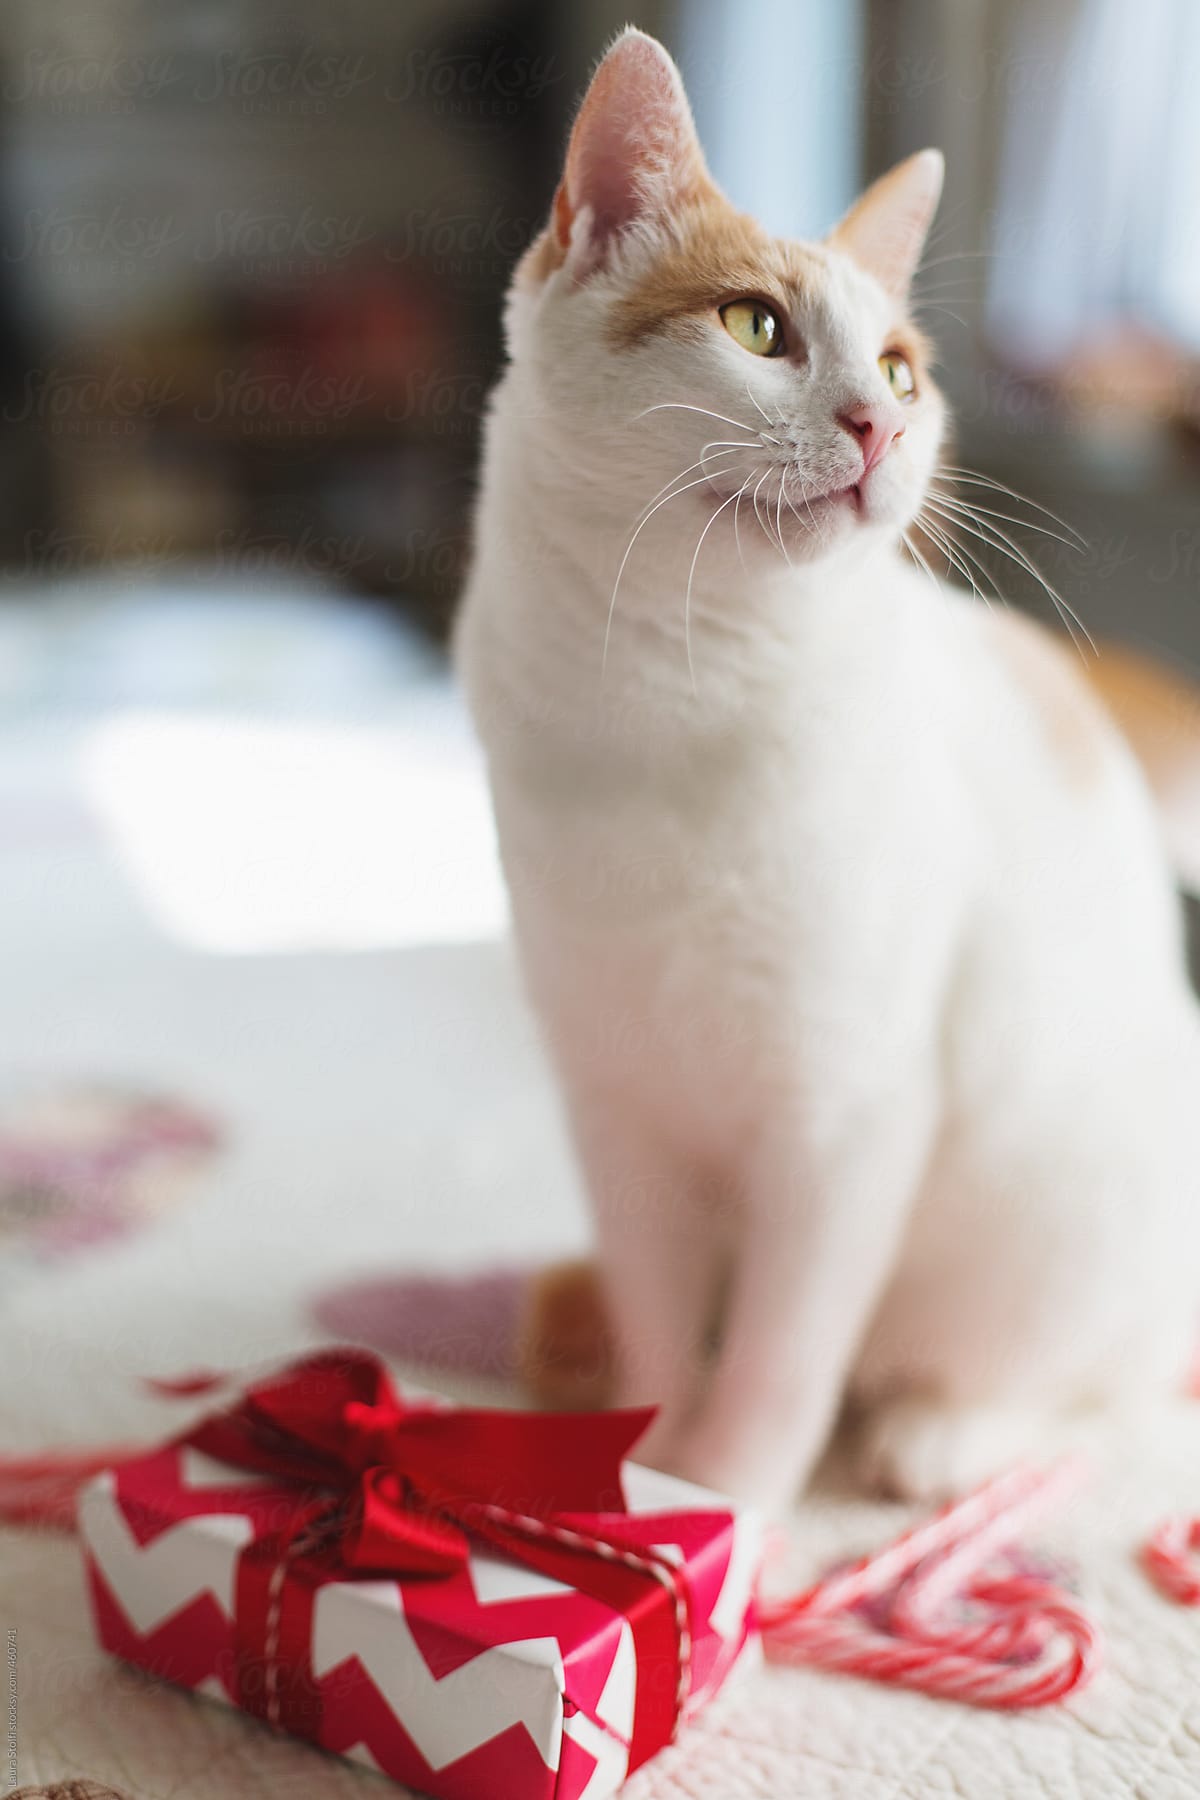 Cat sits close to wrapped present on table and looks away